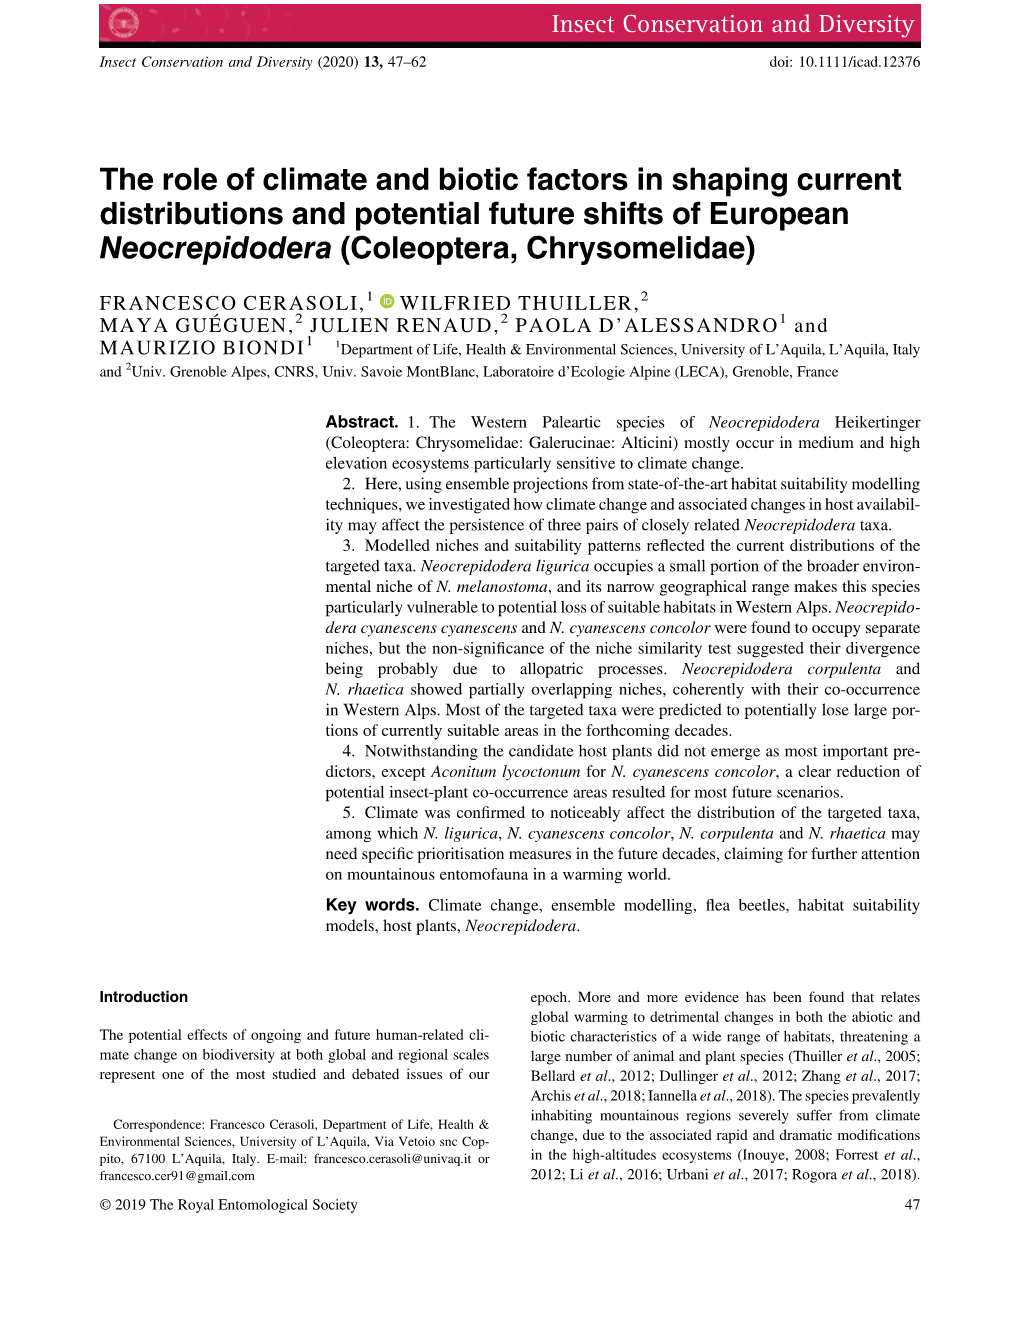 The Role of Climate and Biotic Factors in Shaping Current Distributions and Potential Future Shifts of European Neocrepidodera (Coleoptera, Chrysomelidae)